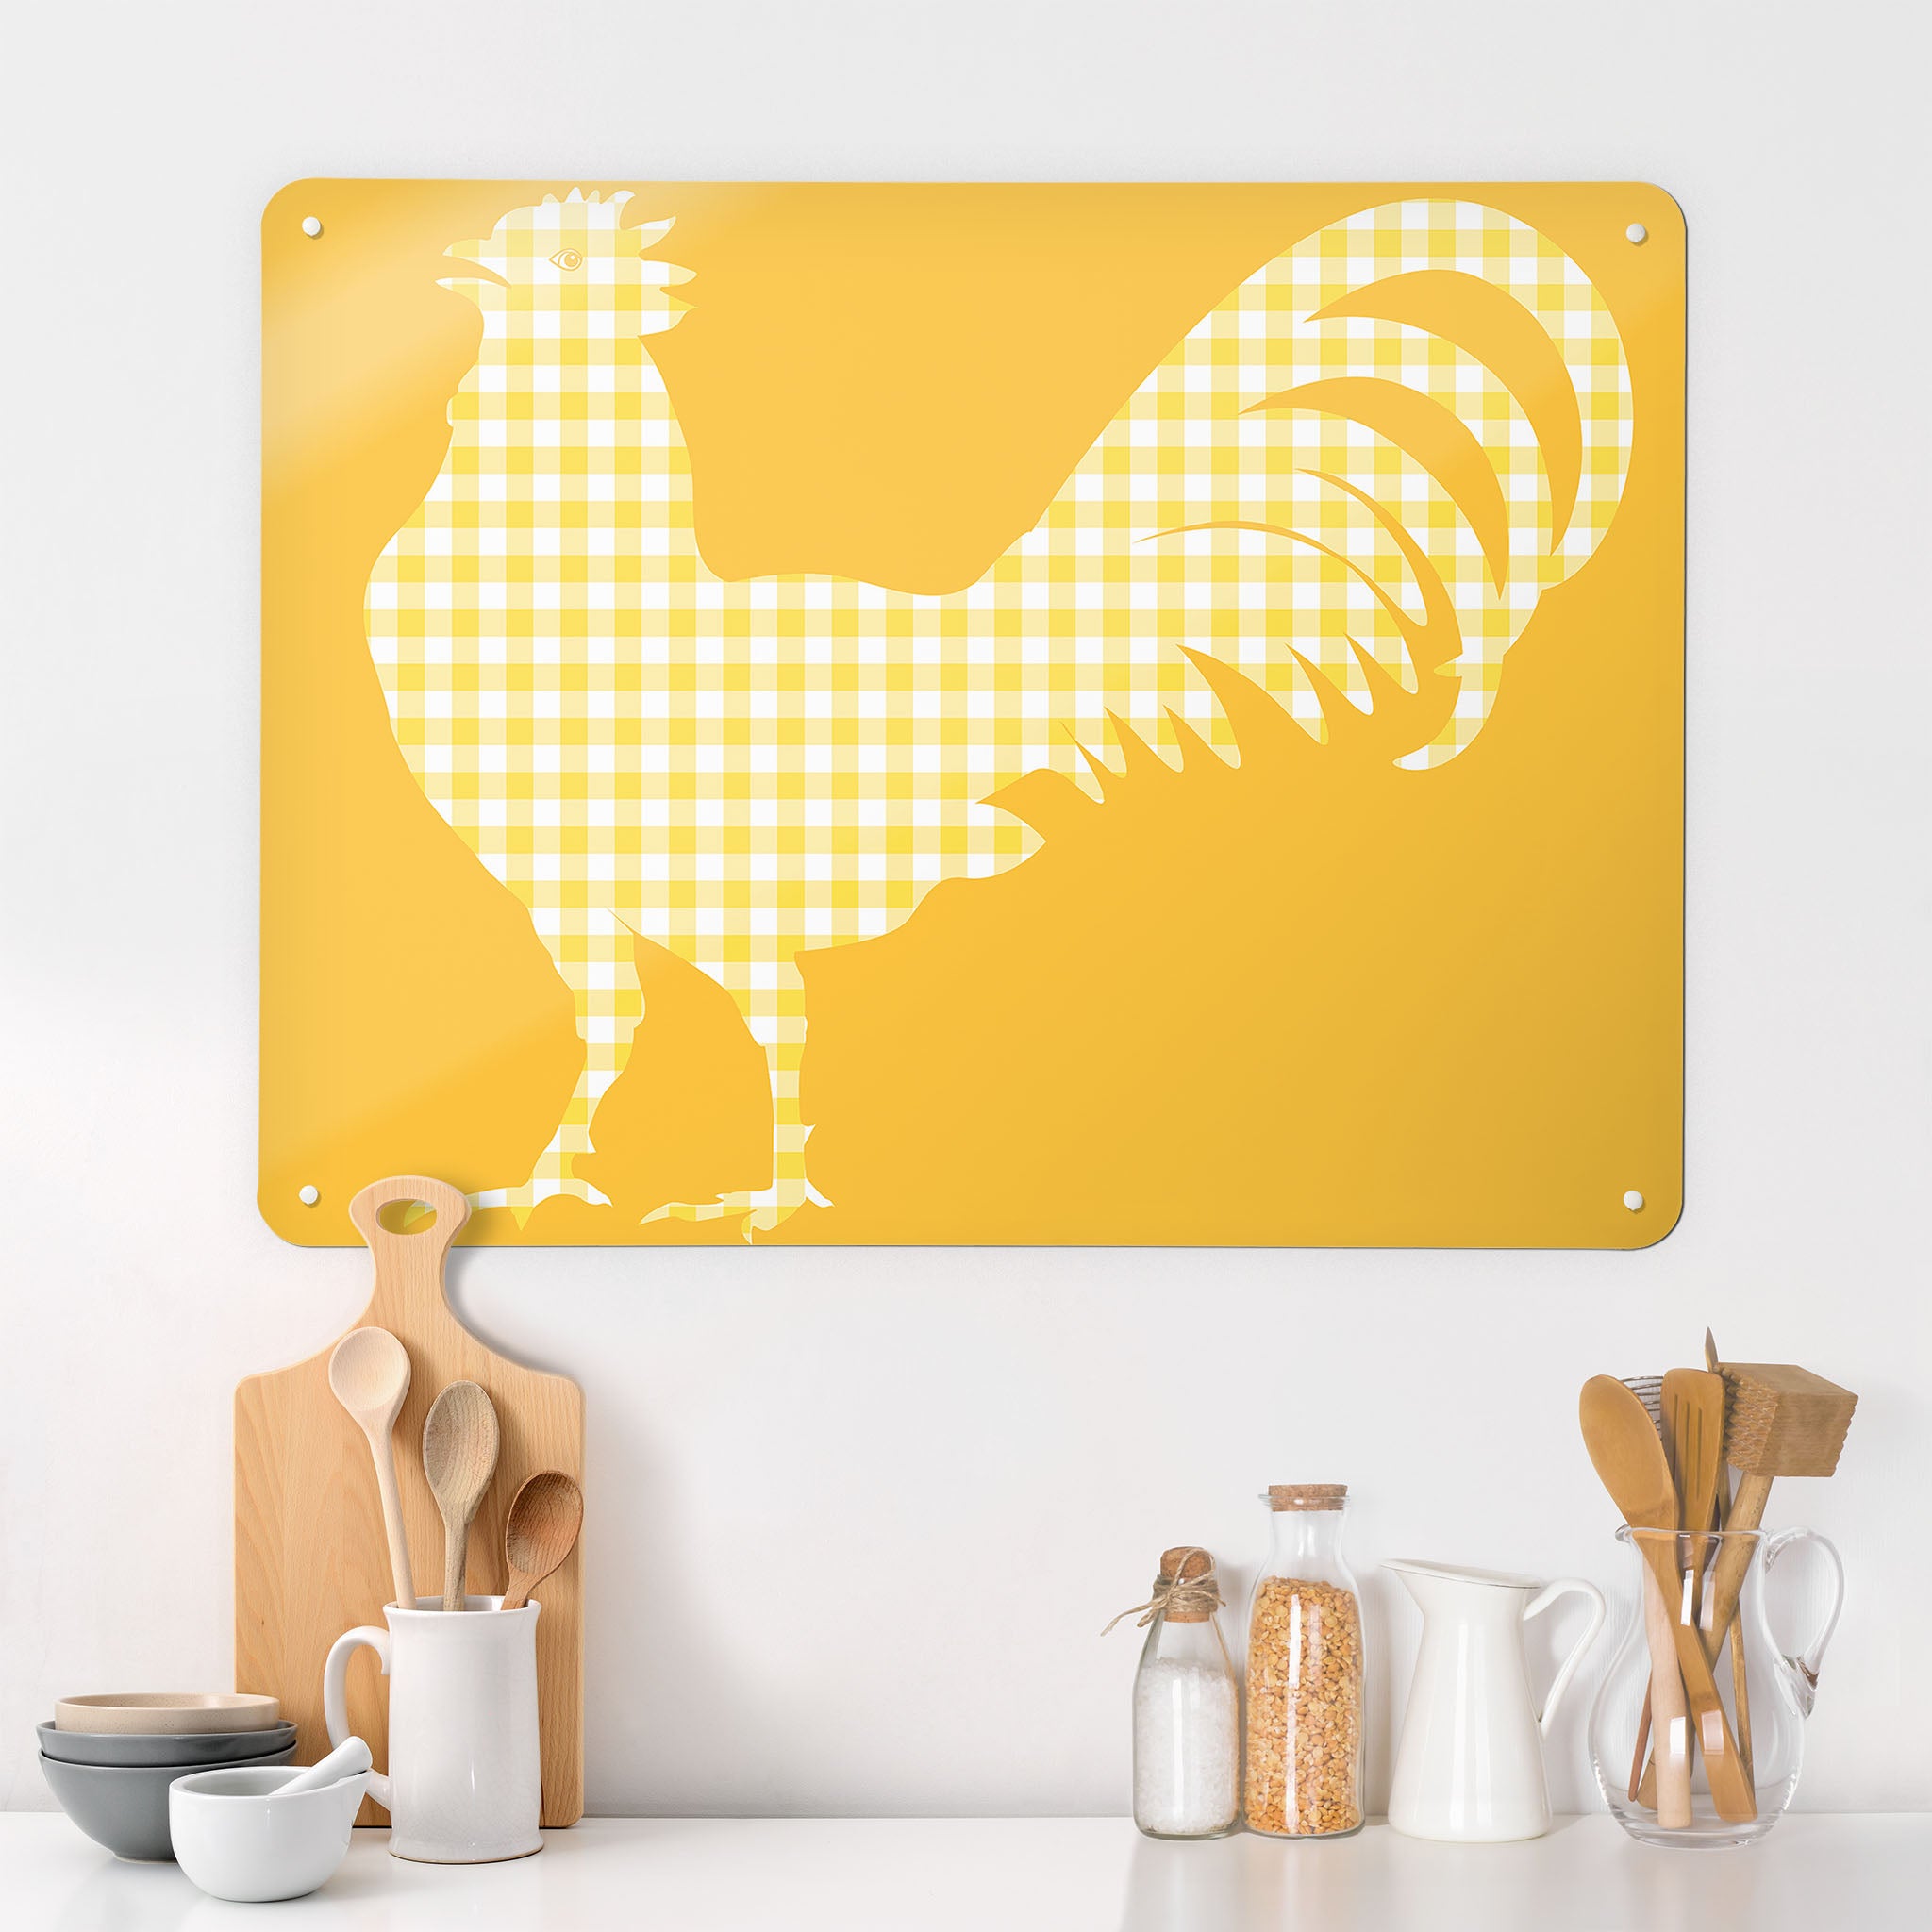 A kitchen interior with a magnetic metal wall art panel with a yellow gingham cockerel design